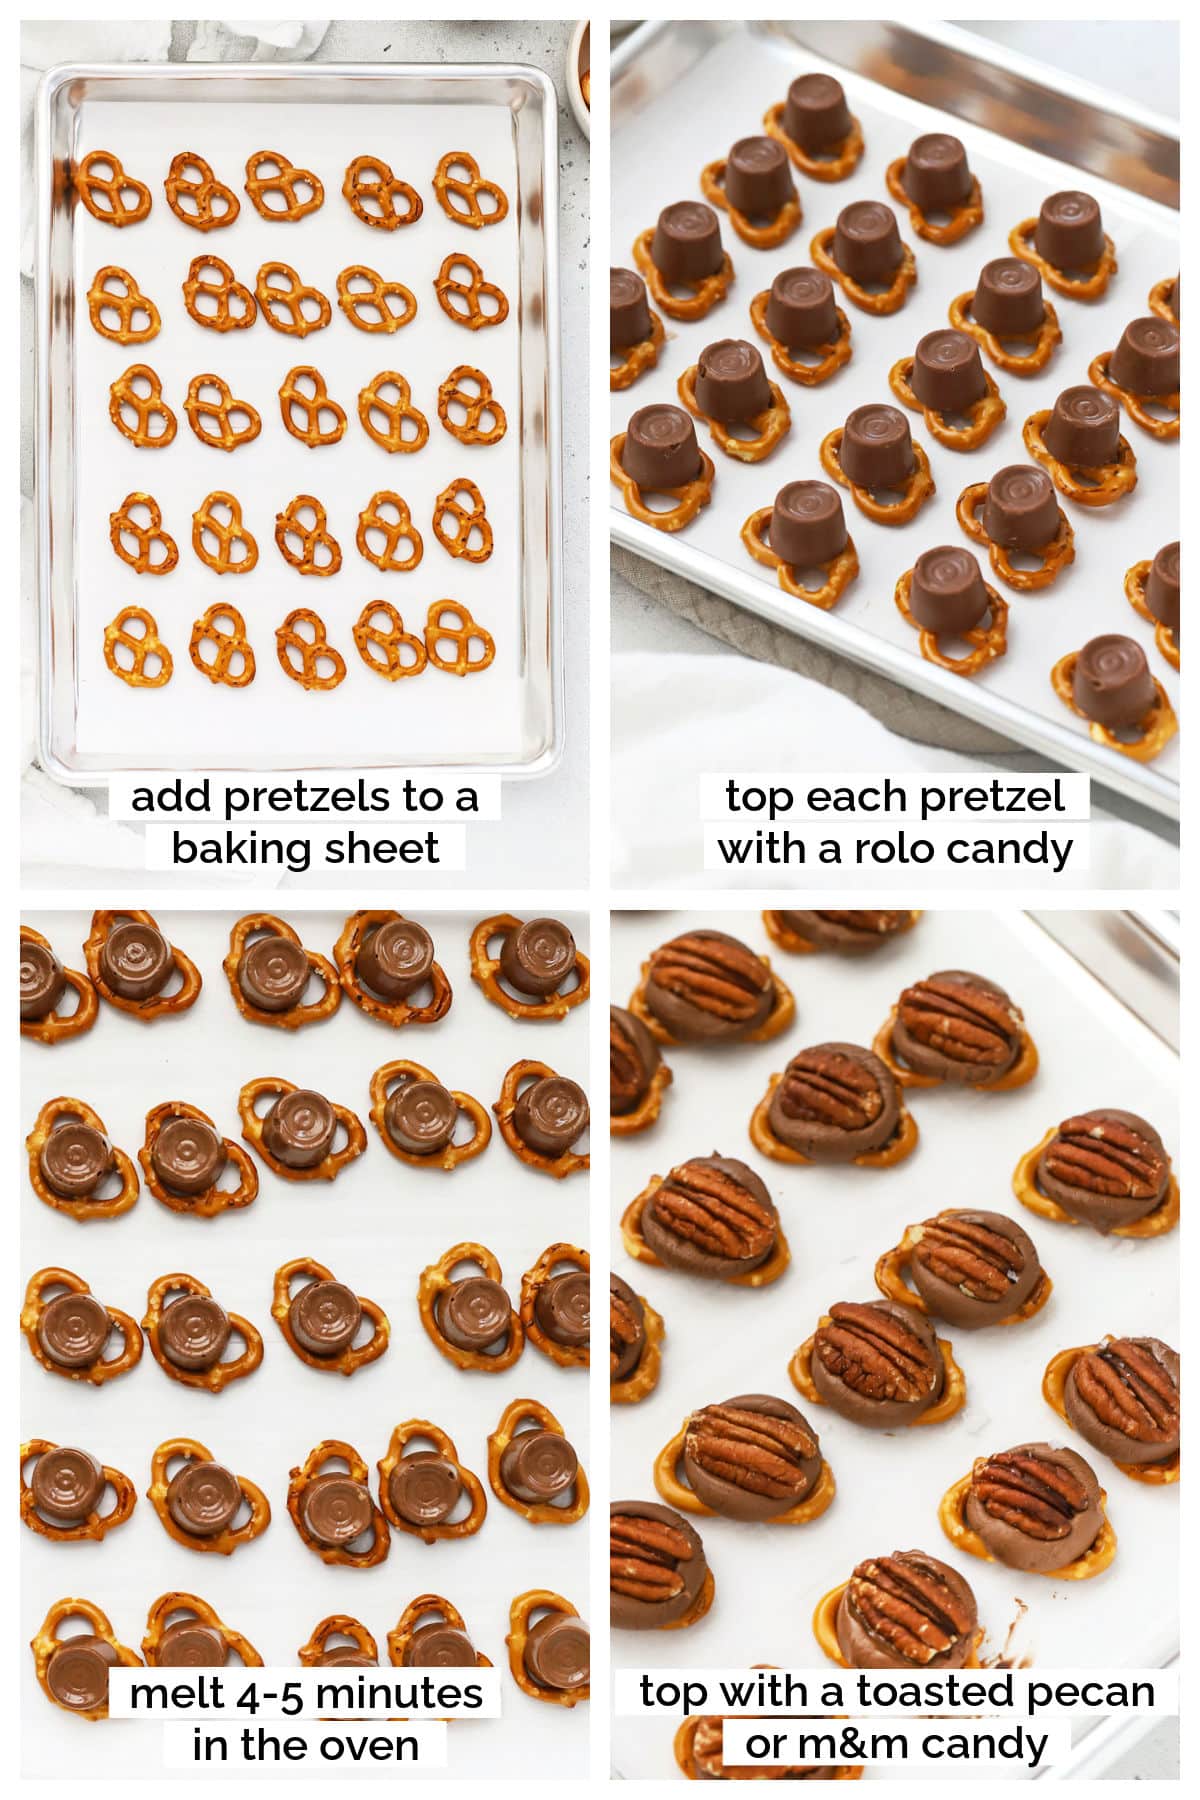 making Rolo pretzels step by step